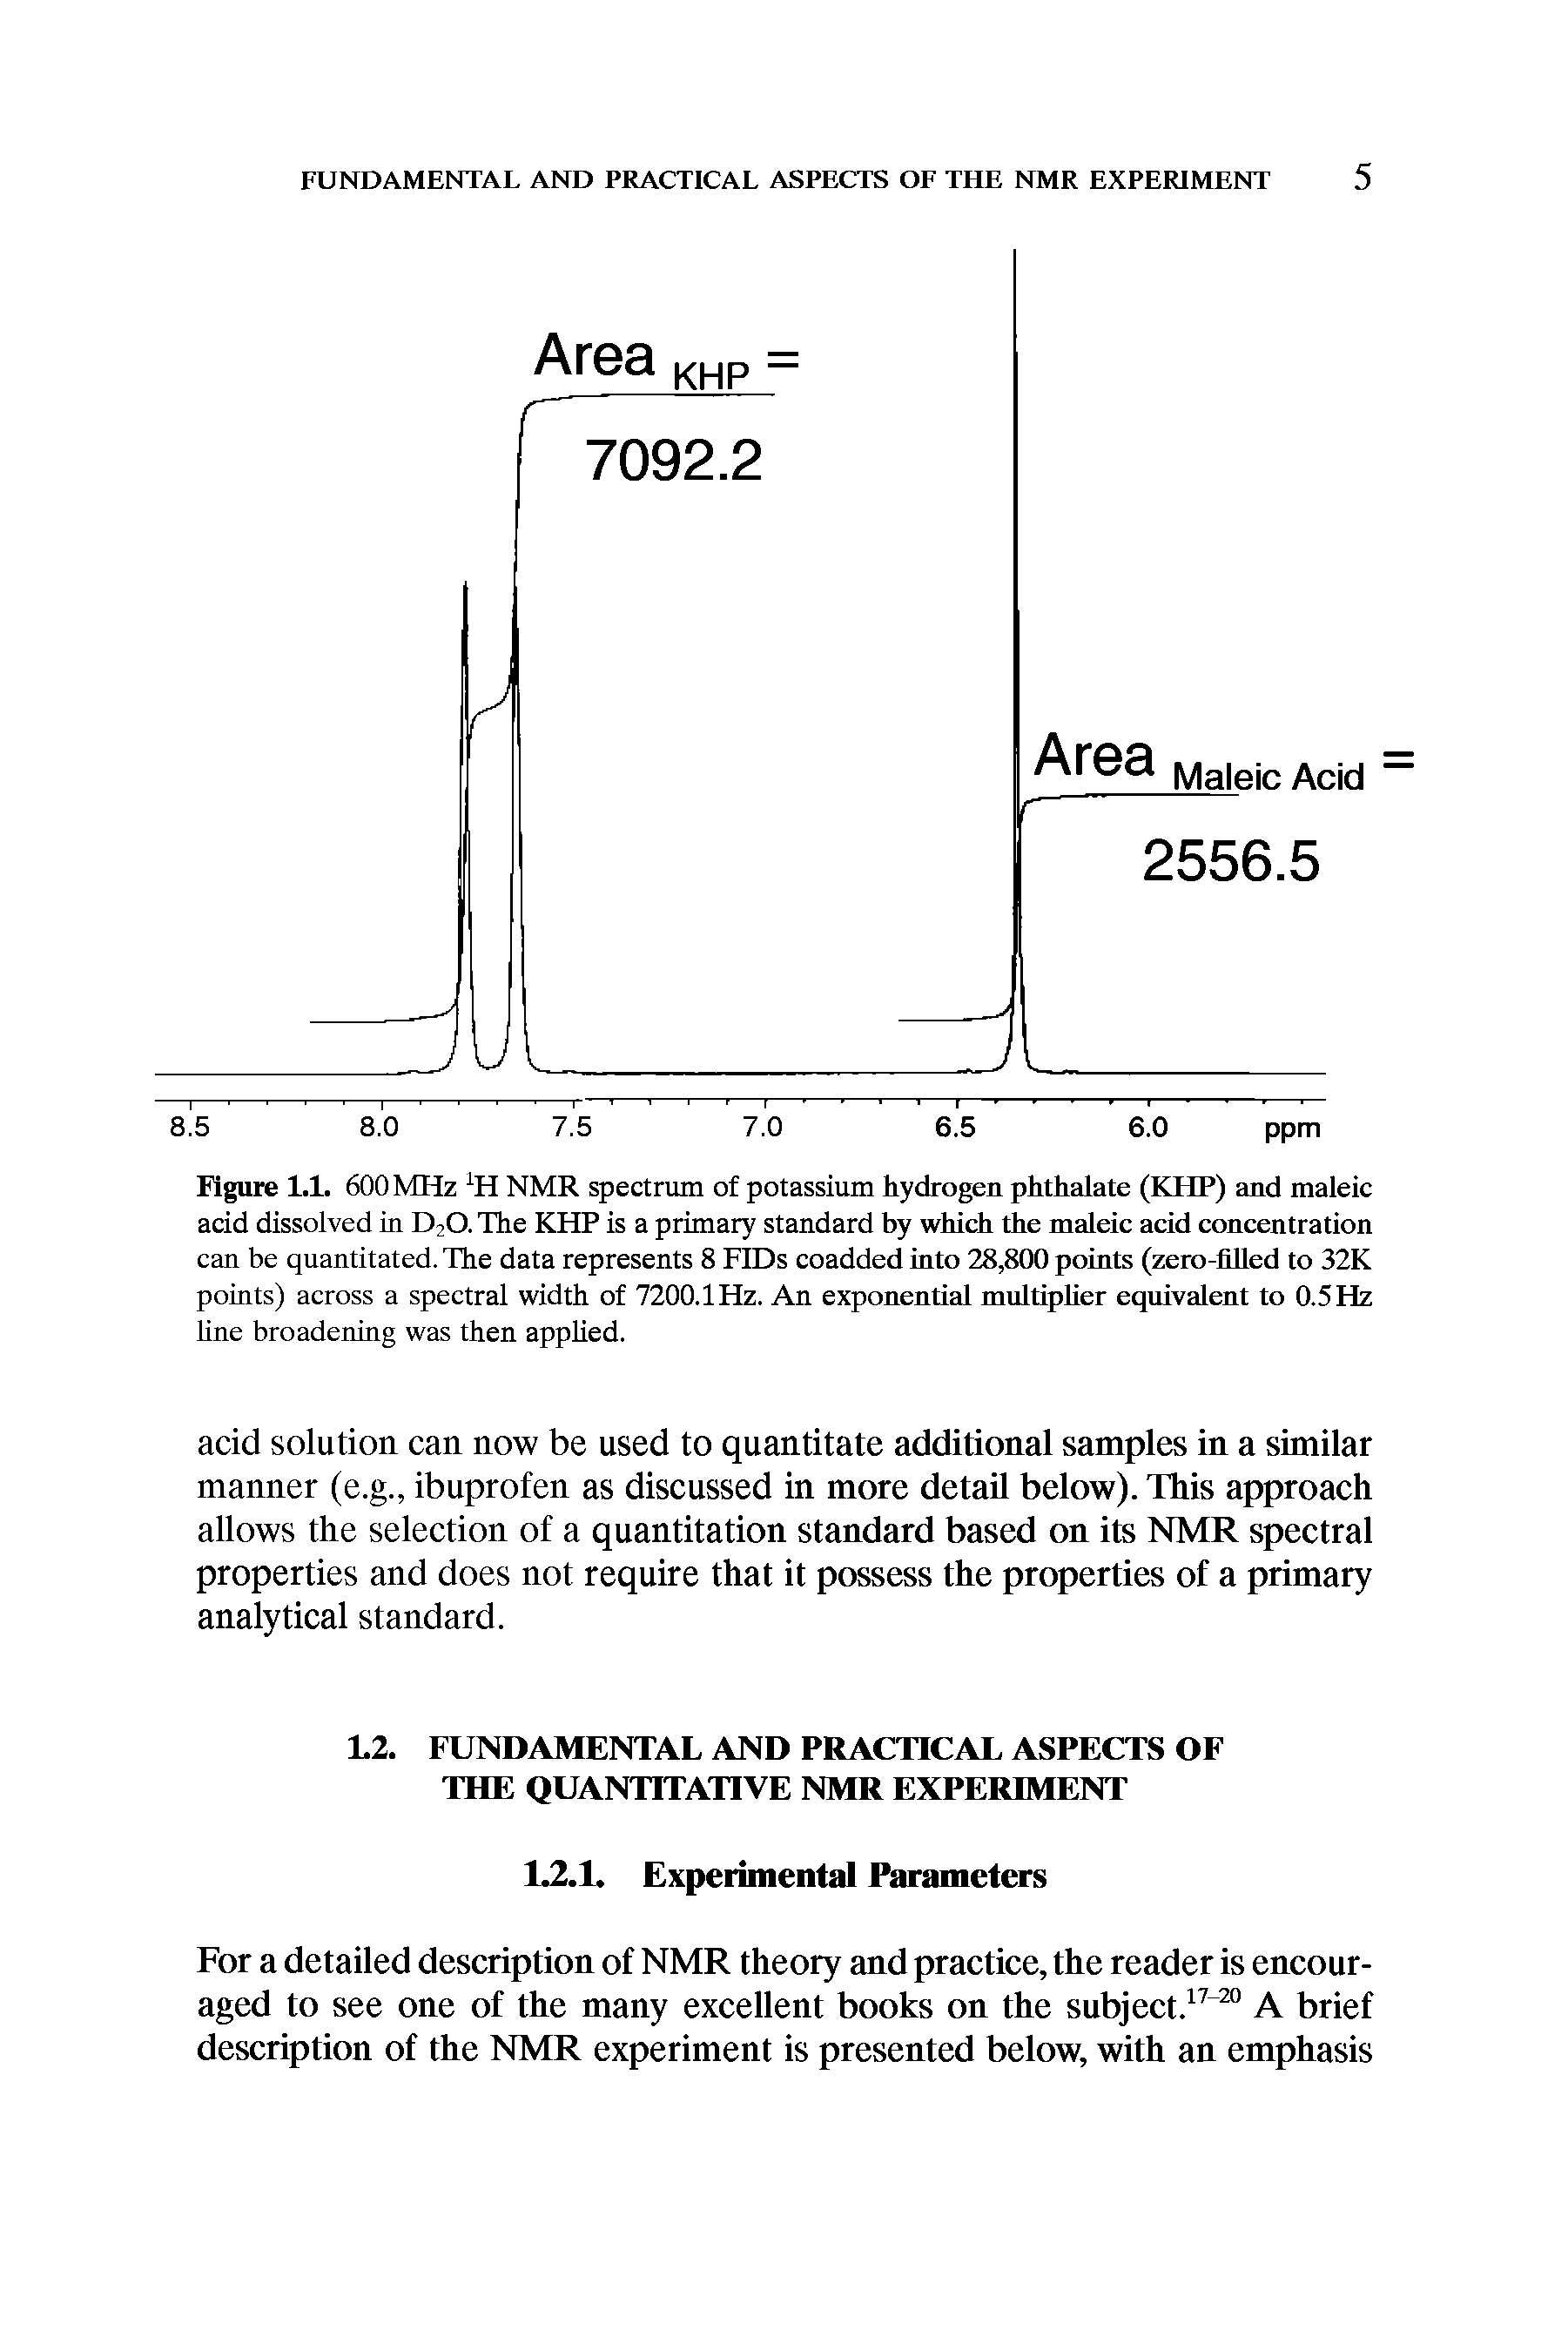 Figure 1.1. 600 MHz NMR spectrum of potassium hydrogen phthalate (KHP) and maleic acid dissolved in D2O. The KHP is a primary standard by which the maleic acid concentration can be quantitated. The data represents 8 FTDs coadded into 28,800 points (zero-filled to 32K points) across a spectral width of 7200.1Hz. An exponential multiplier equivalent to 0.5Hz...